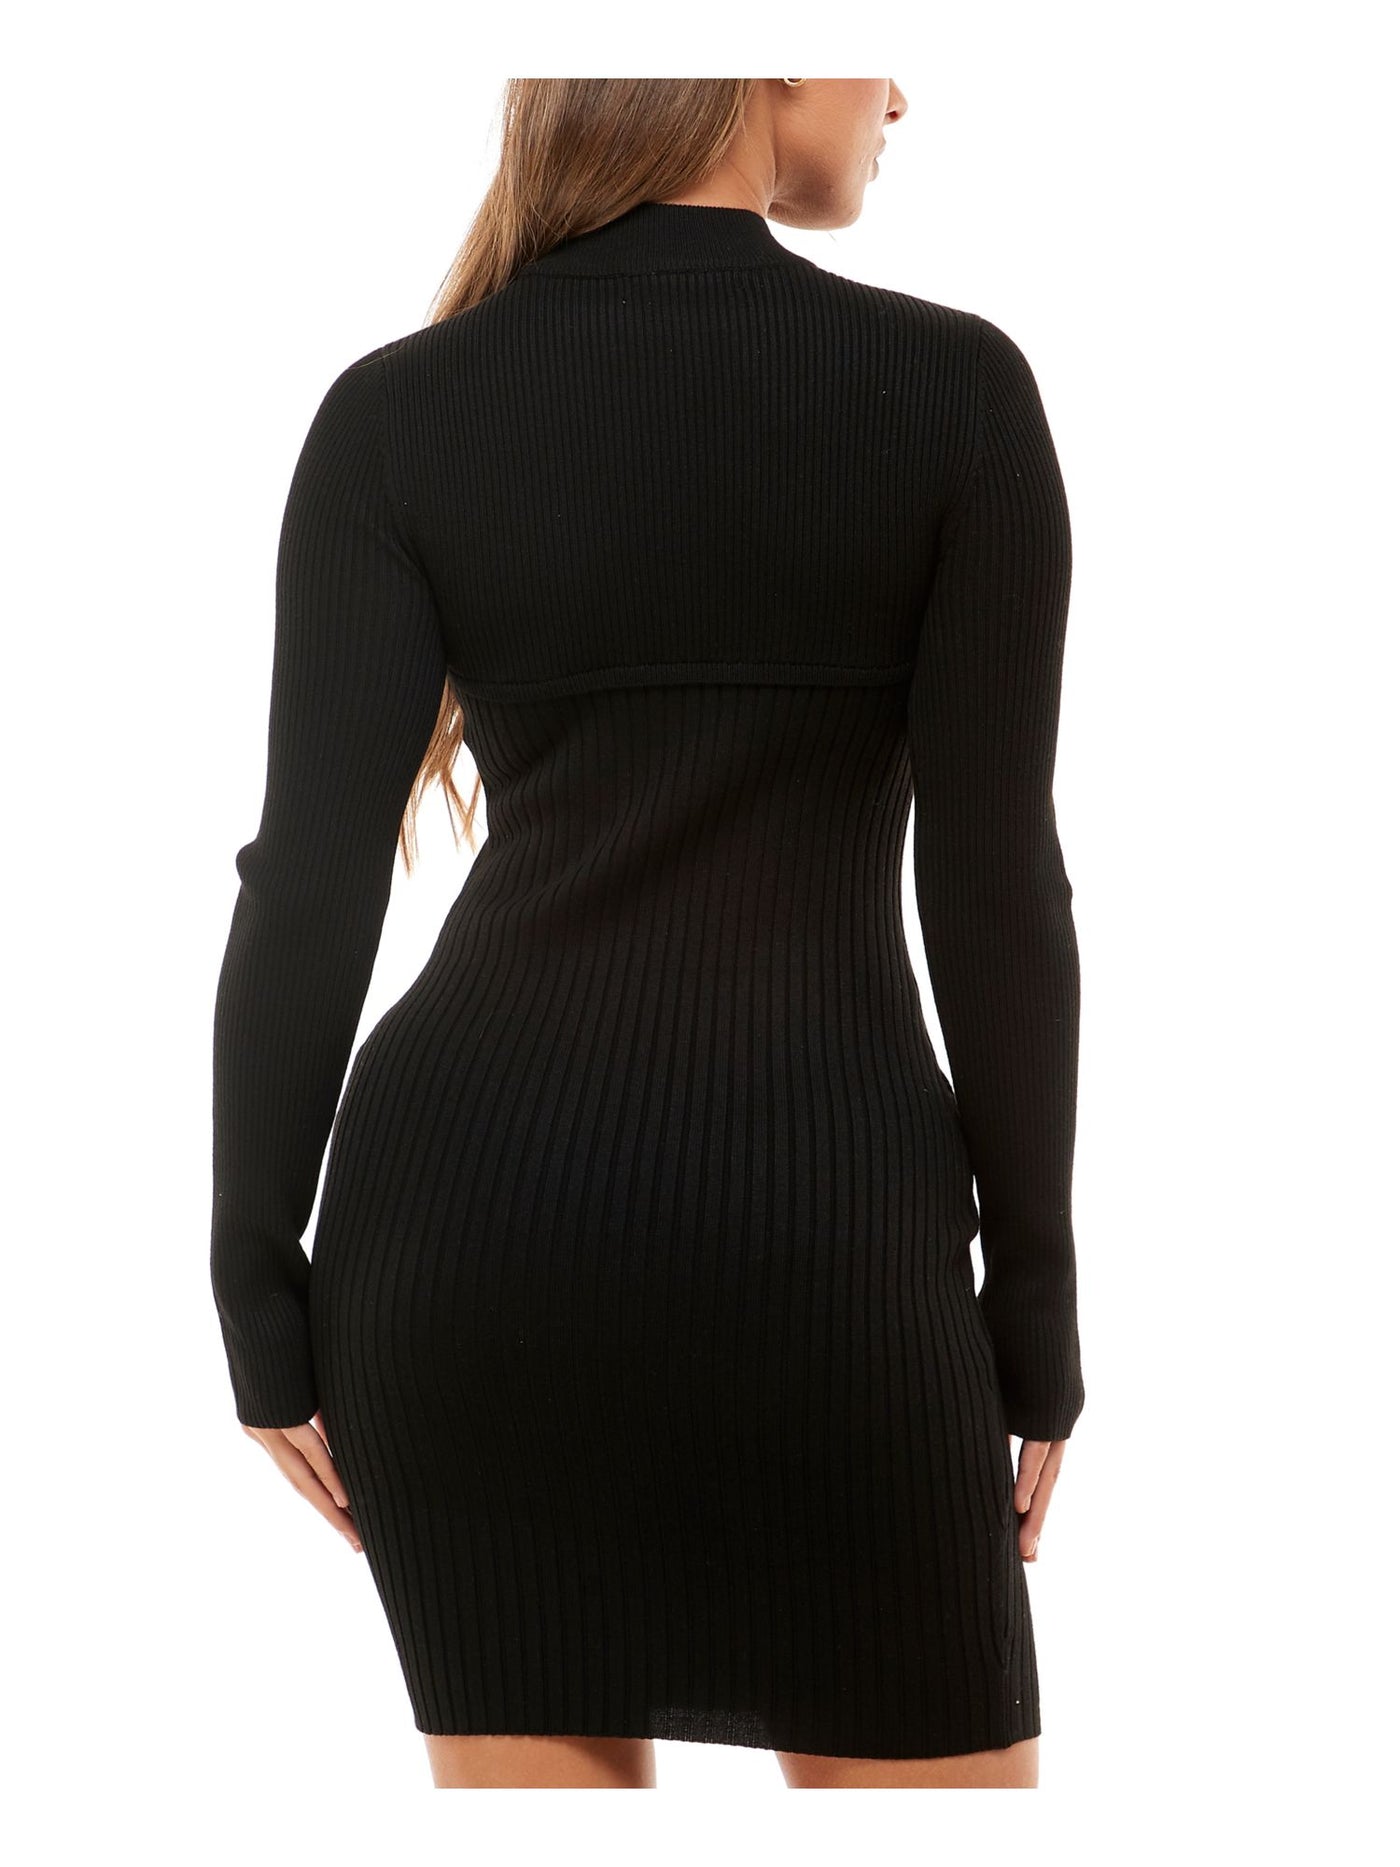 PLANET GOLD Womens Black Knit Ribbed Cut Out Grommet Lace Up Detail Long Sleeve Mock Neck Short Party Body Con Dress Juniors XS